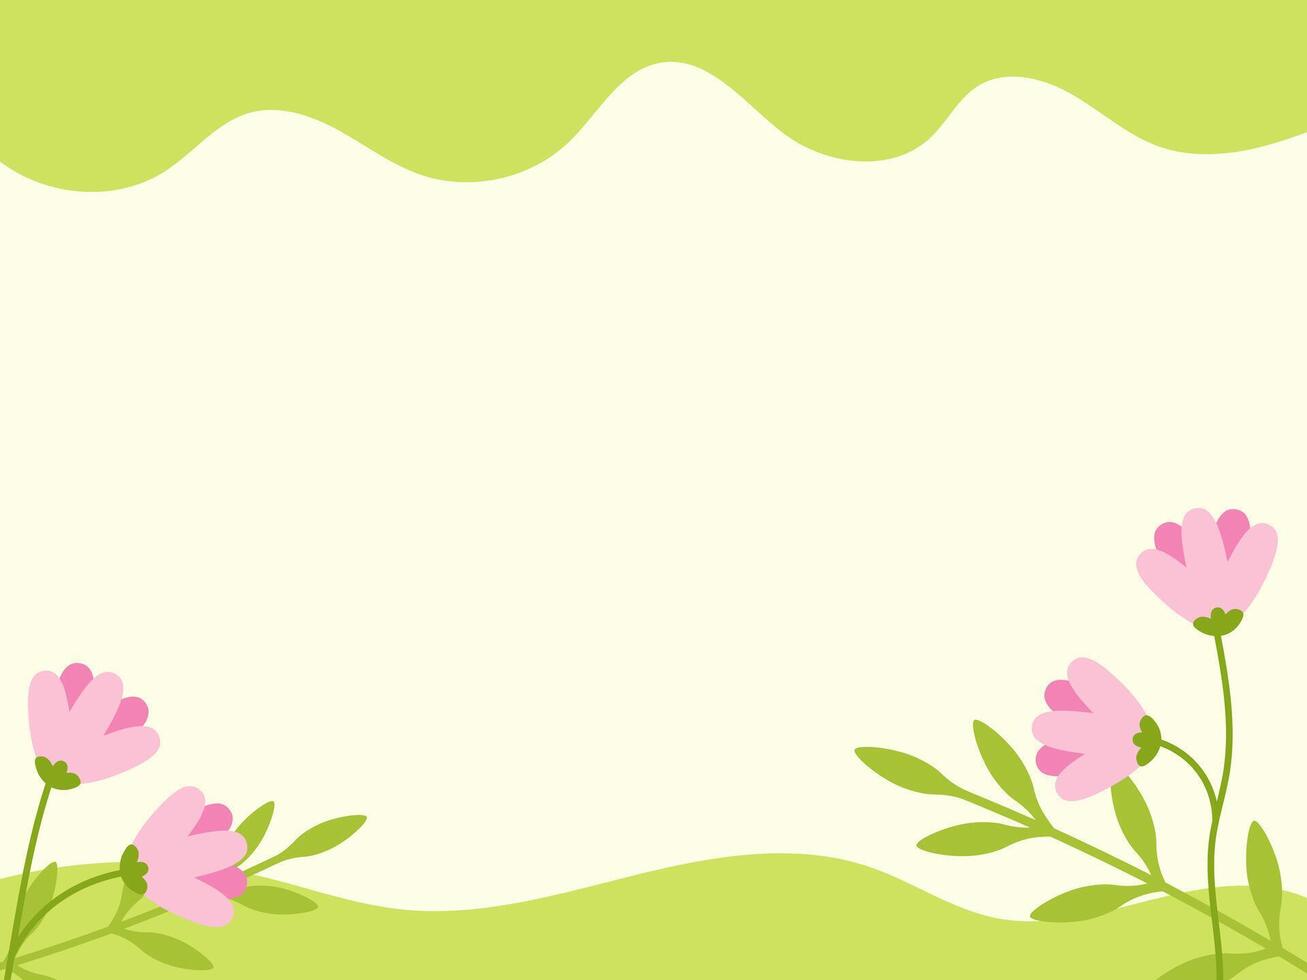 Abstract background with copy space text. Hand drawn spring or summer Template with flowers. Green vector illustration